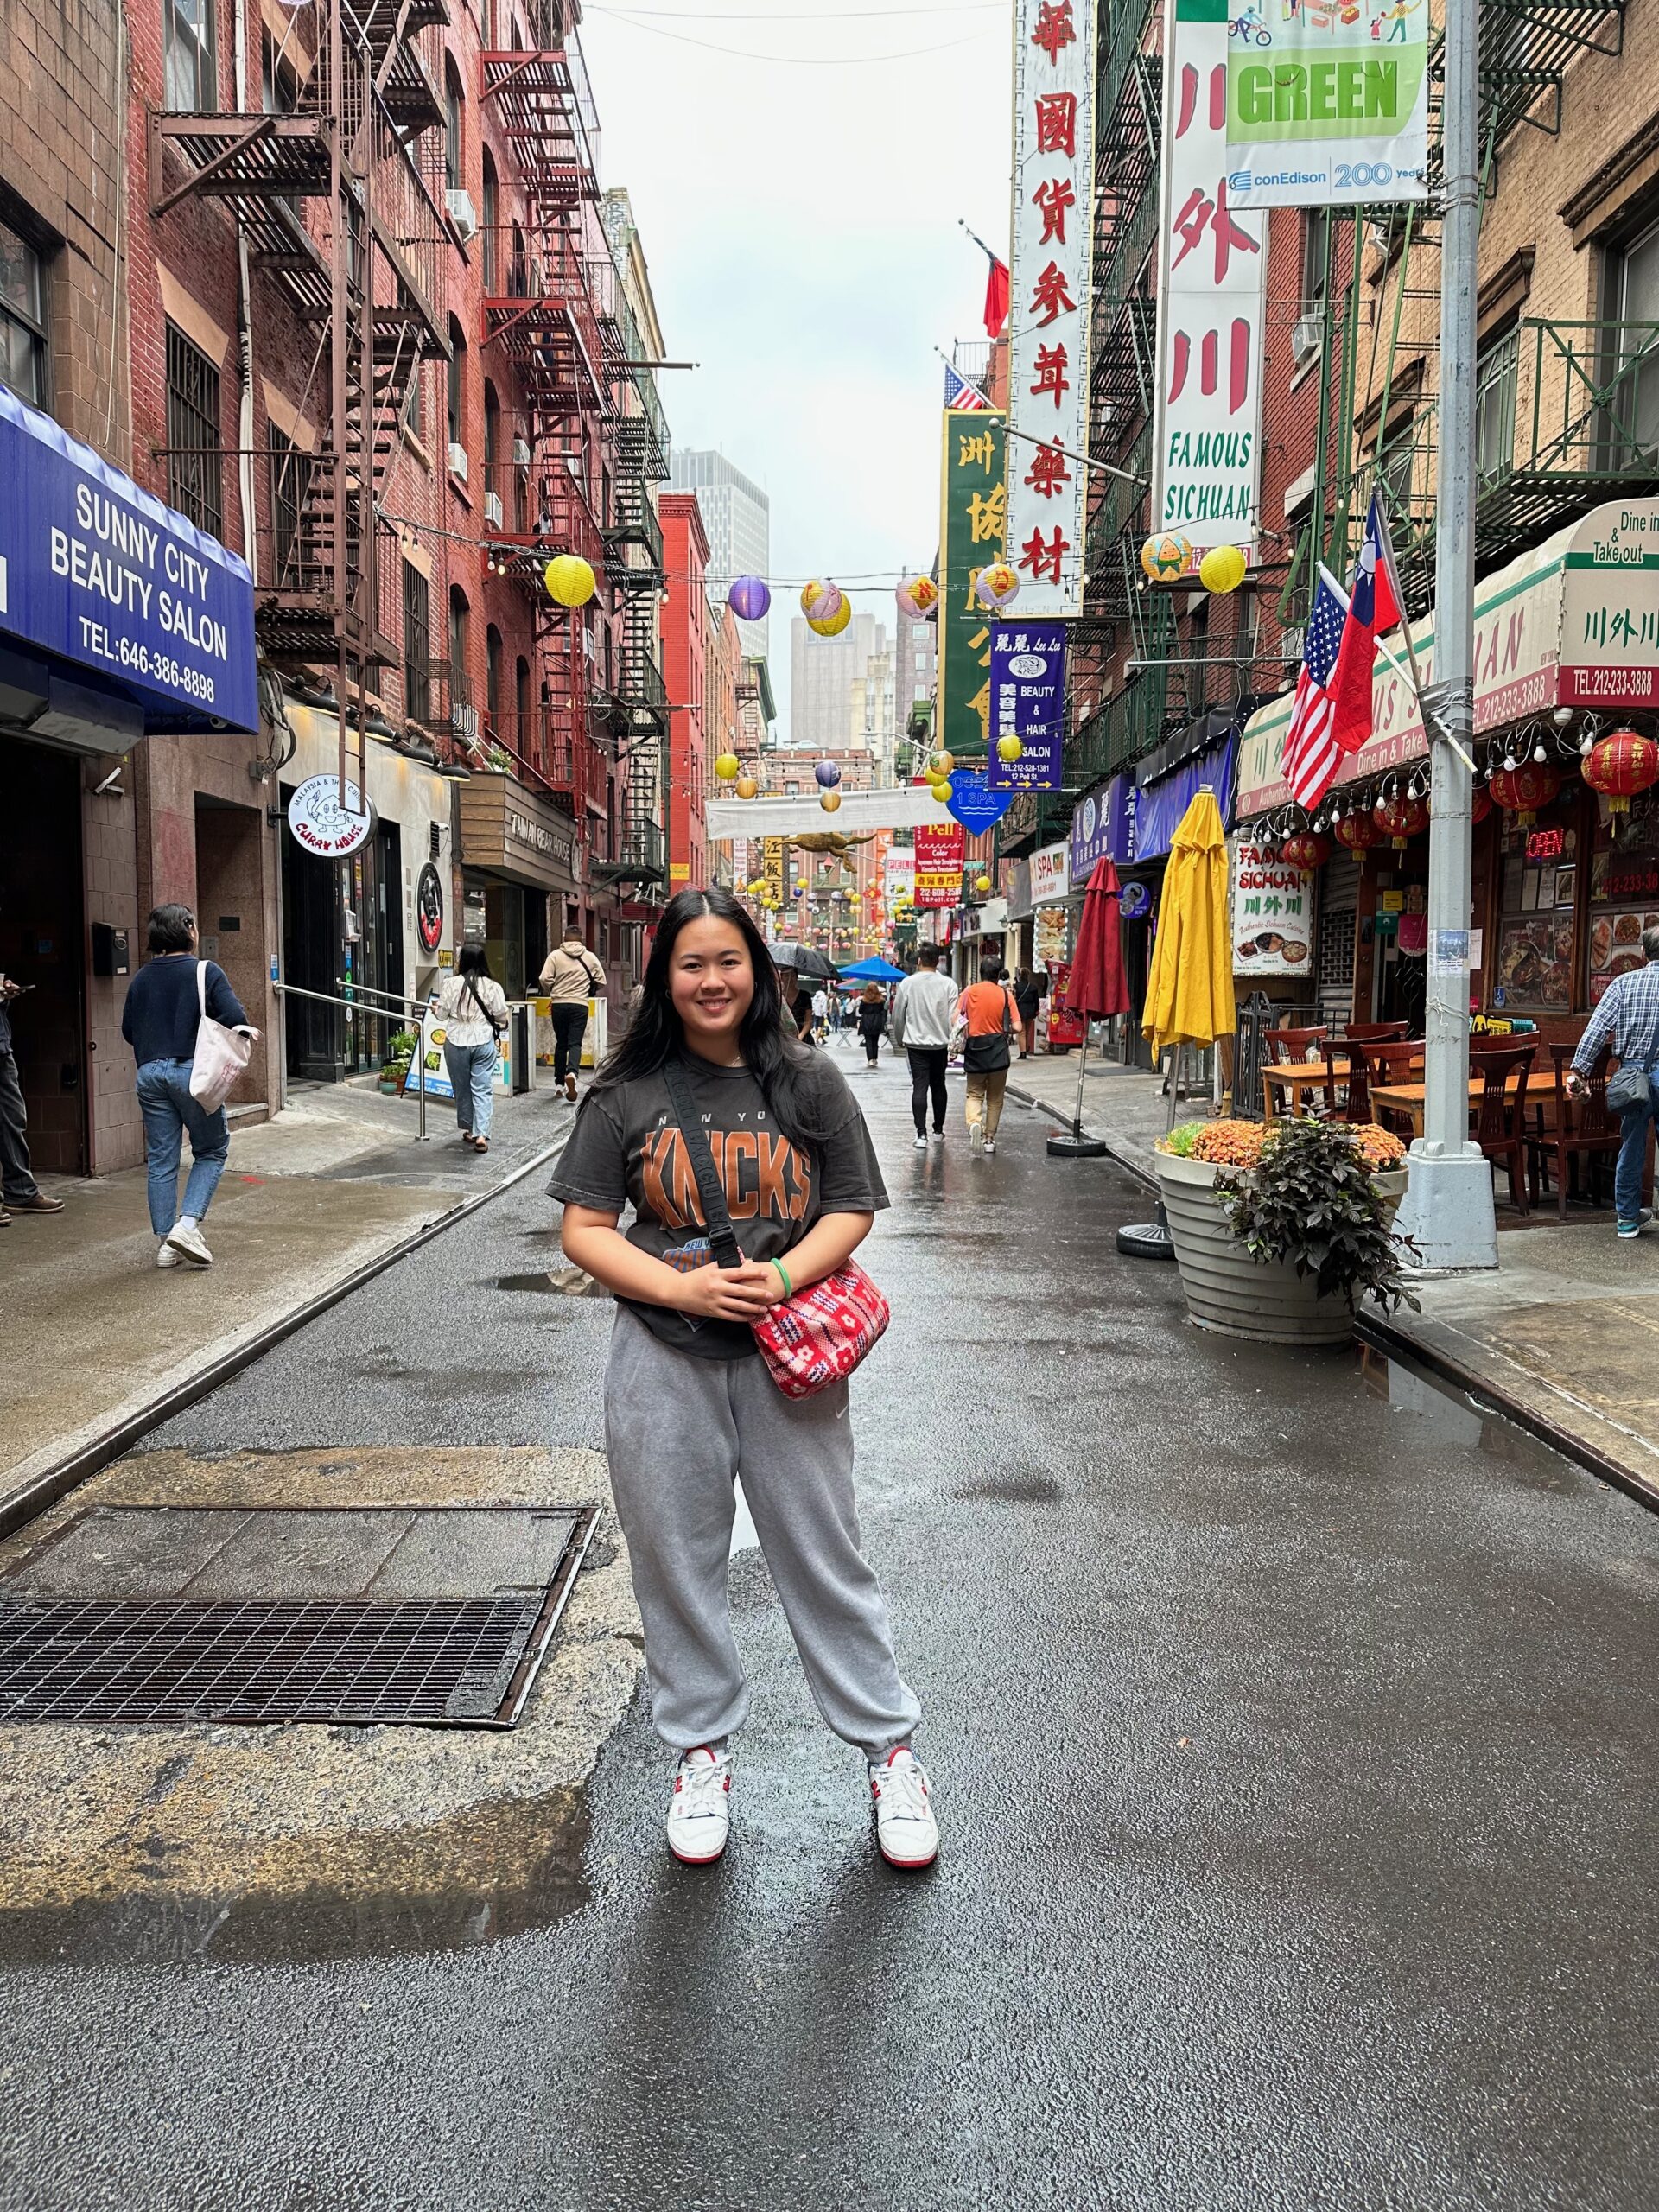 The author standing in the middle of a street in Chinatown during a grocery store run.